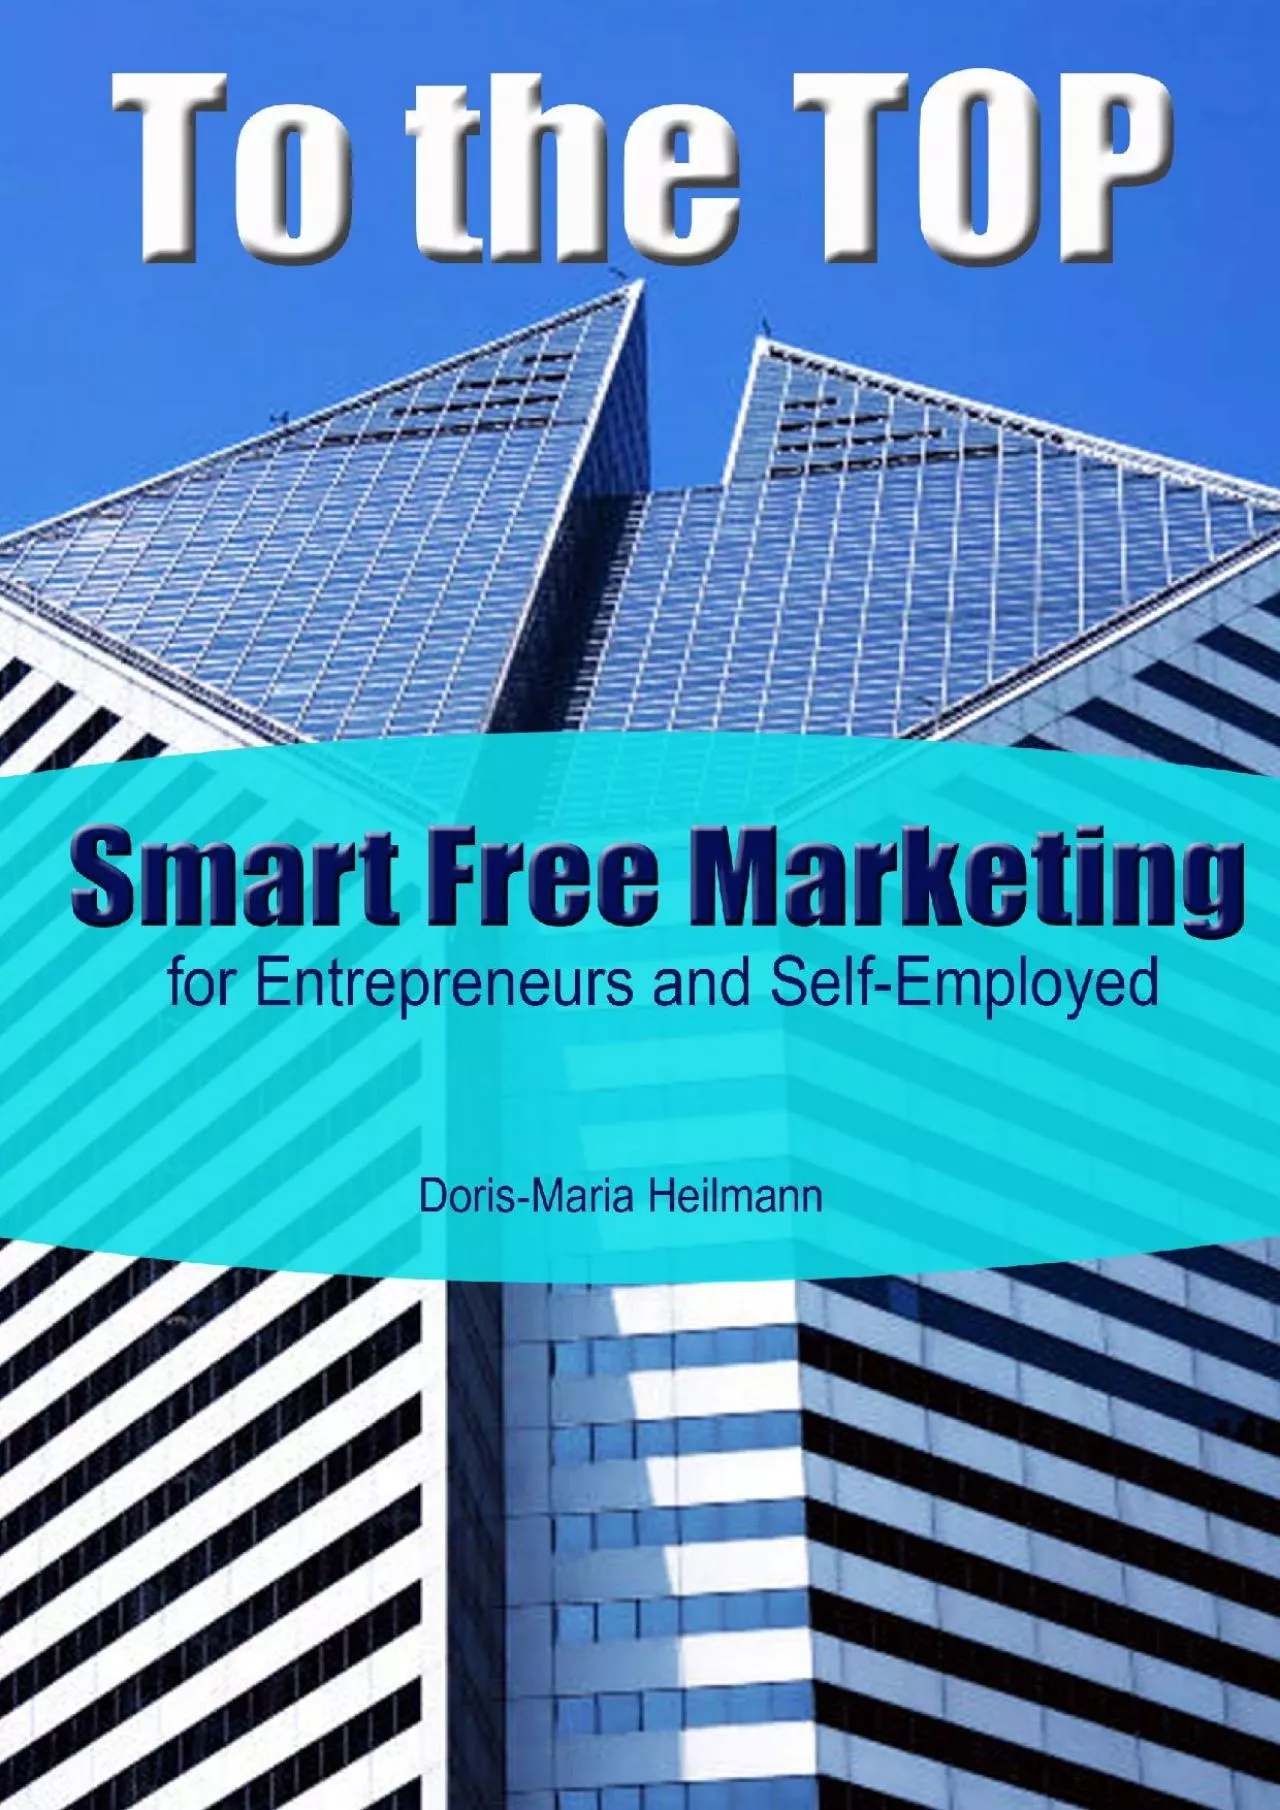 (BOOS)-To the TOP: With Smart Free Marketing for Entrepreneurs and Self-Employed - Marketing